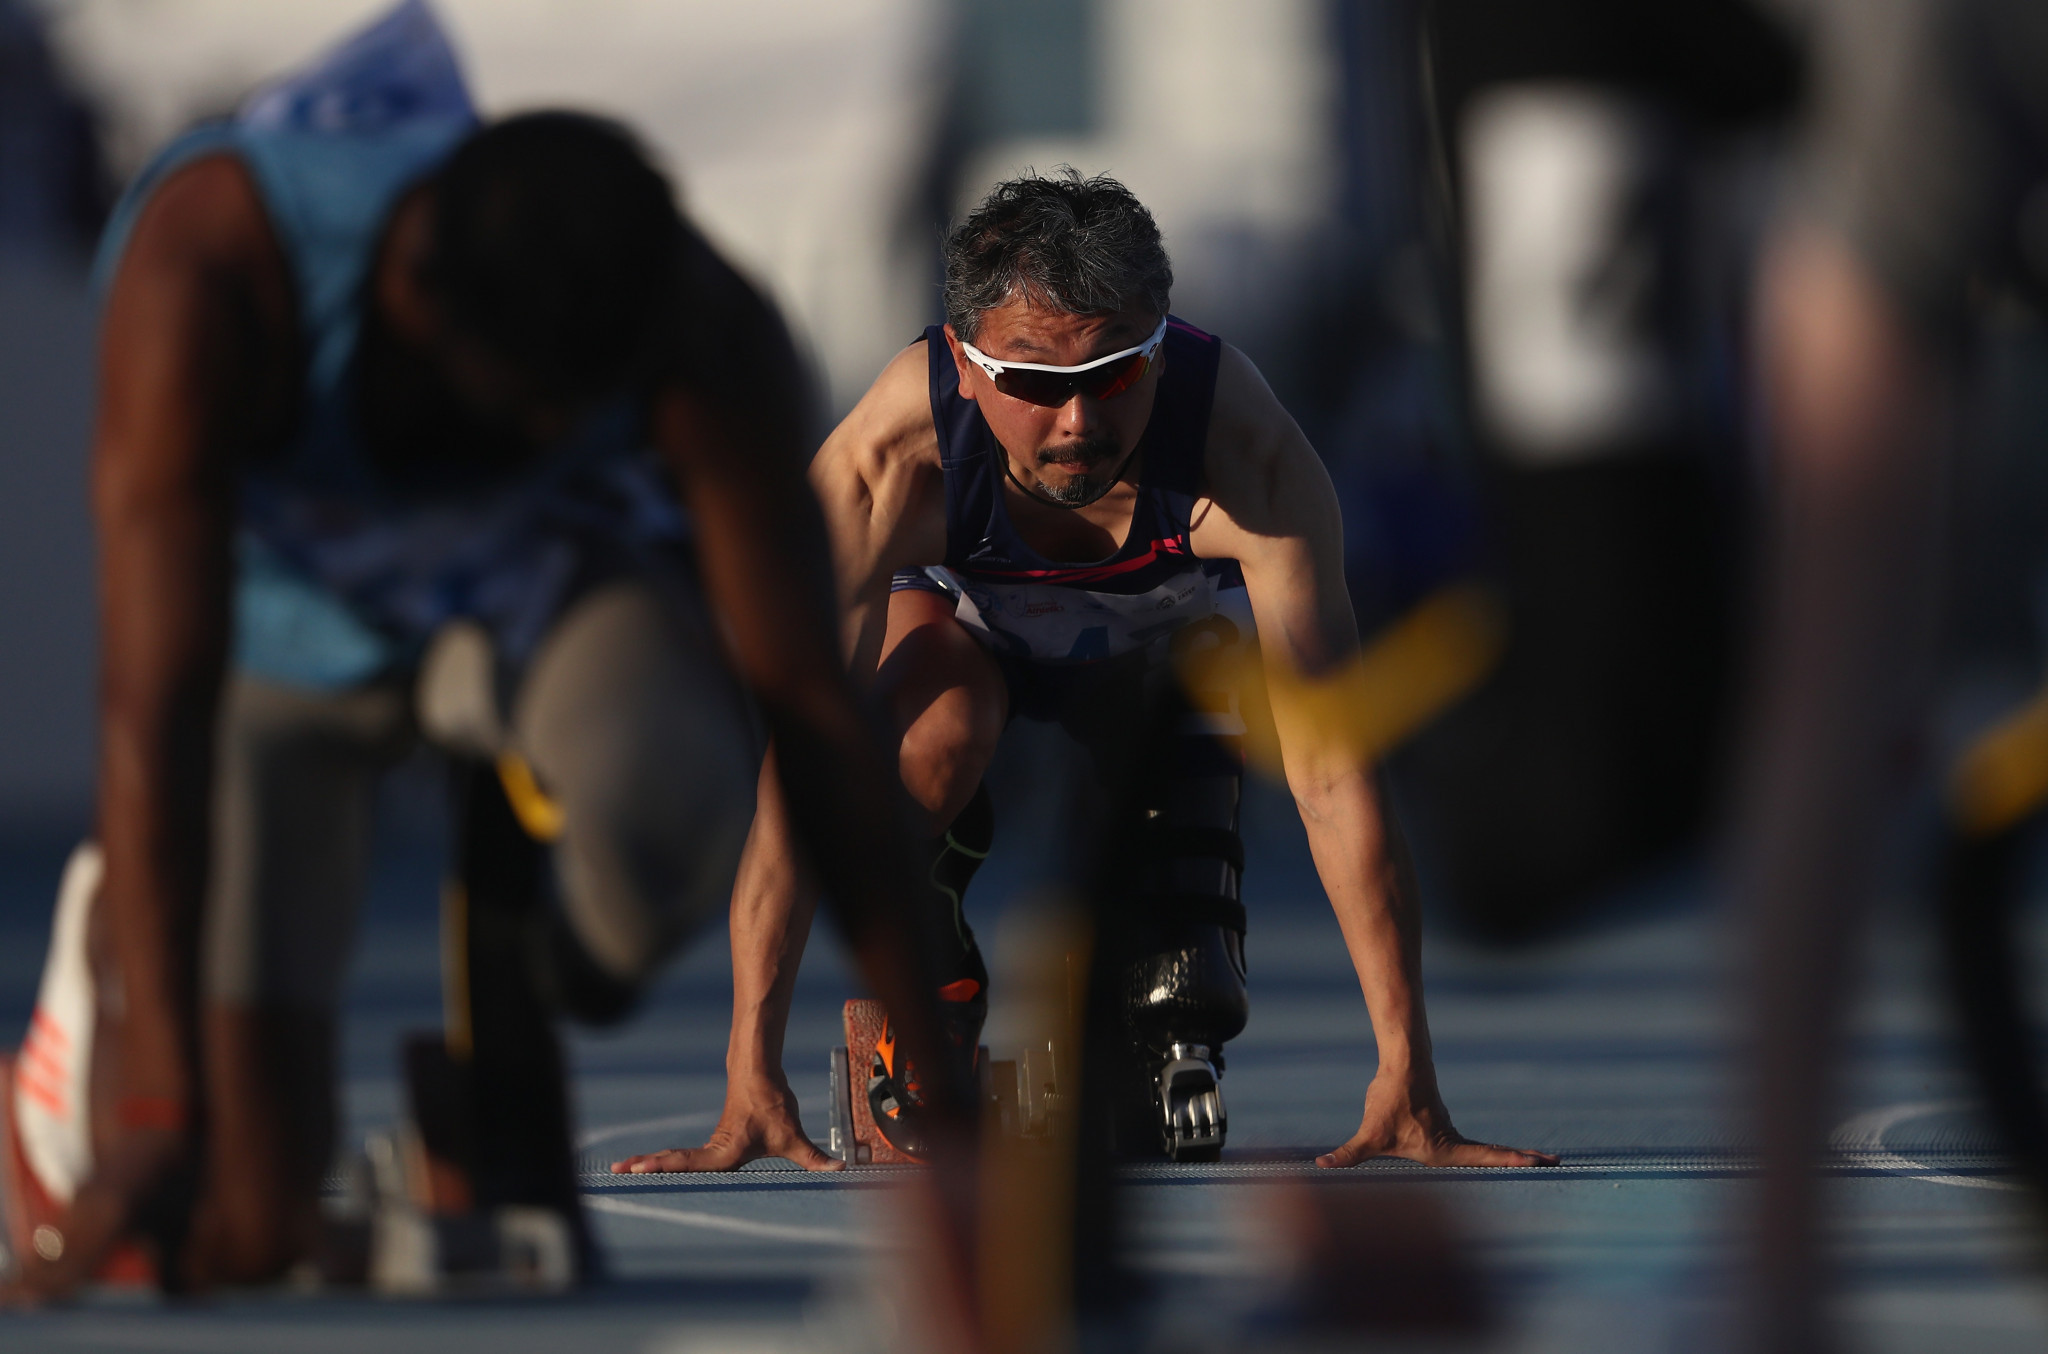 Competitors are on their marks for the 2019 World Para Athletics Grand Prix which will start in Dubai in February ©Getty Images  